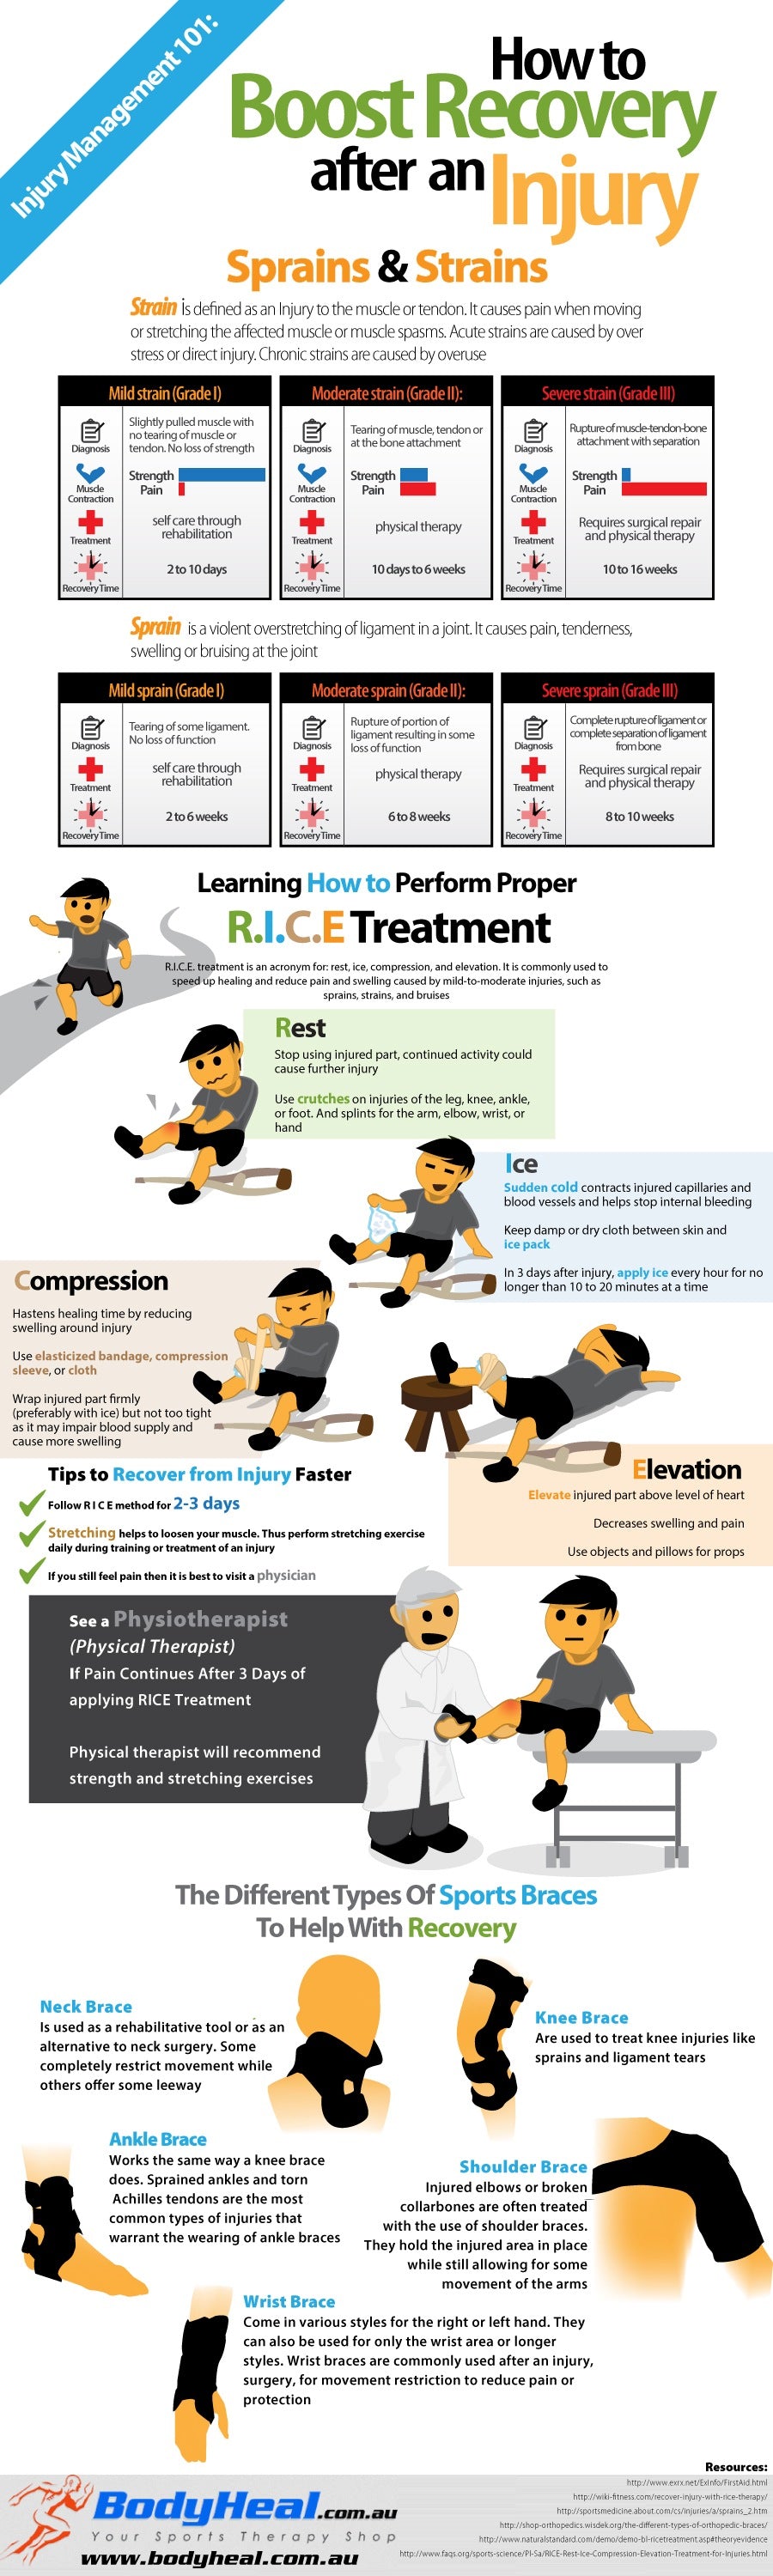 Infographic: How To Boost Recovery From A Sports Injury With R.I.C.E. Treatment